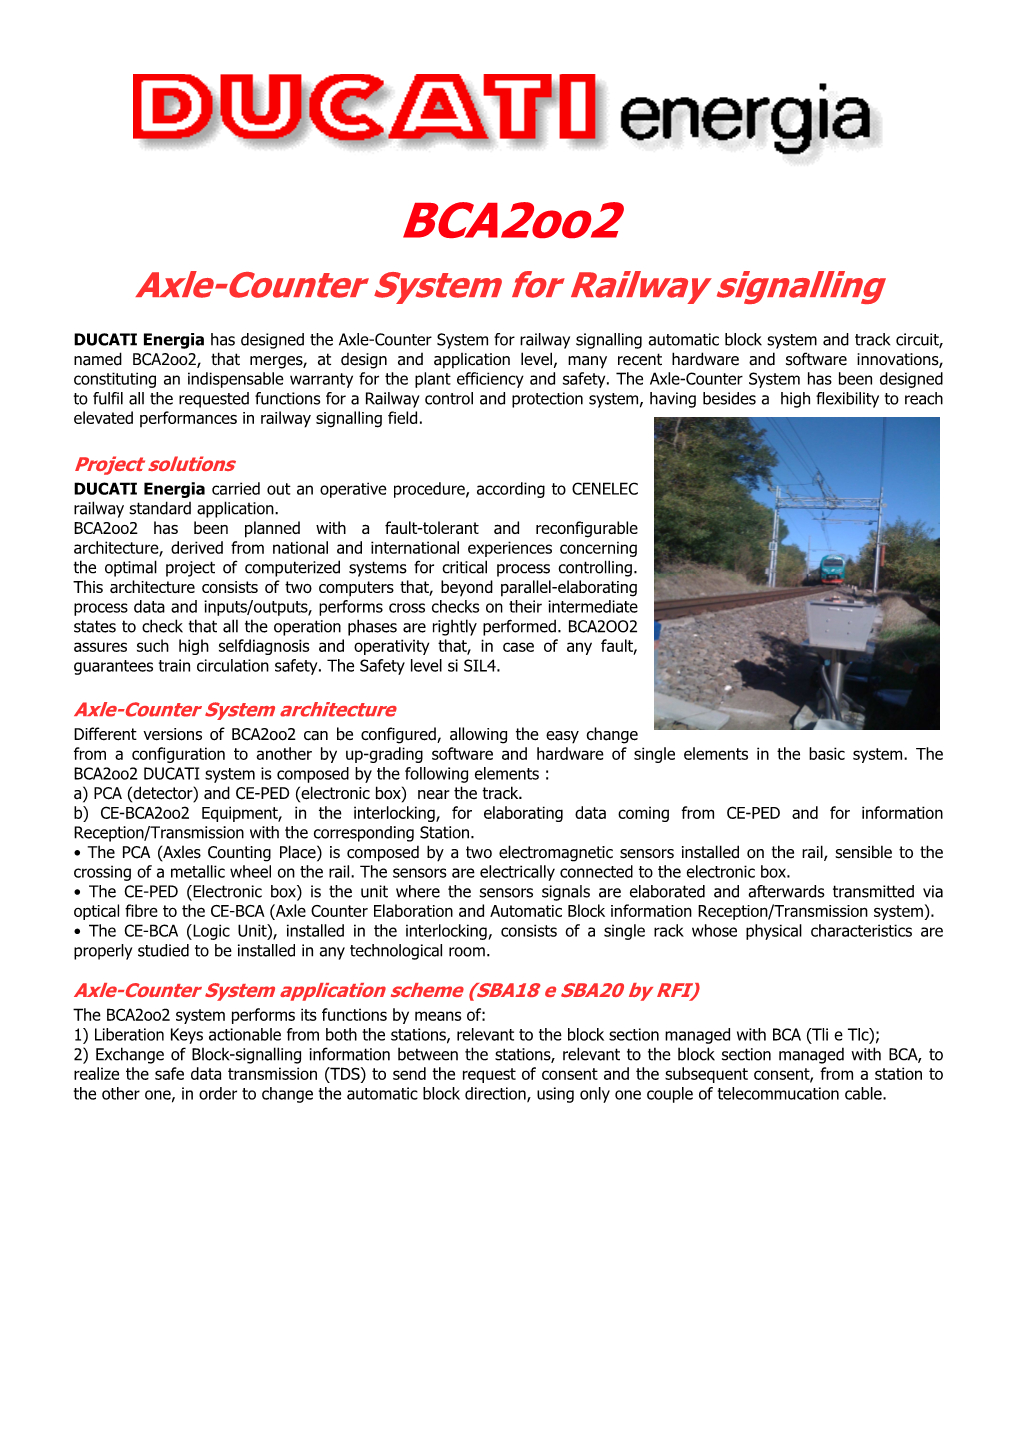 Bca2oo2 Axle-Counter System for Railway Signalling